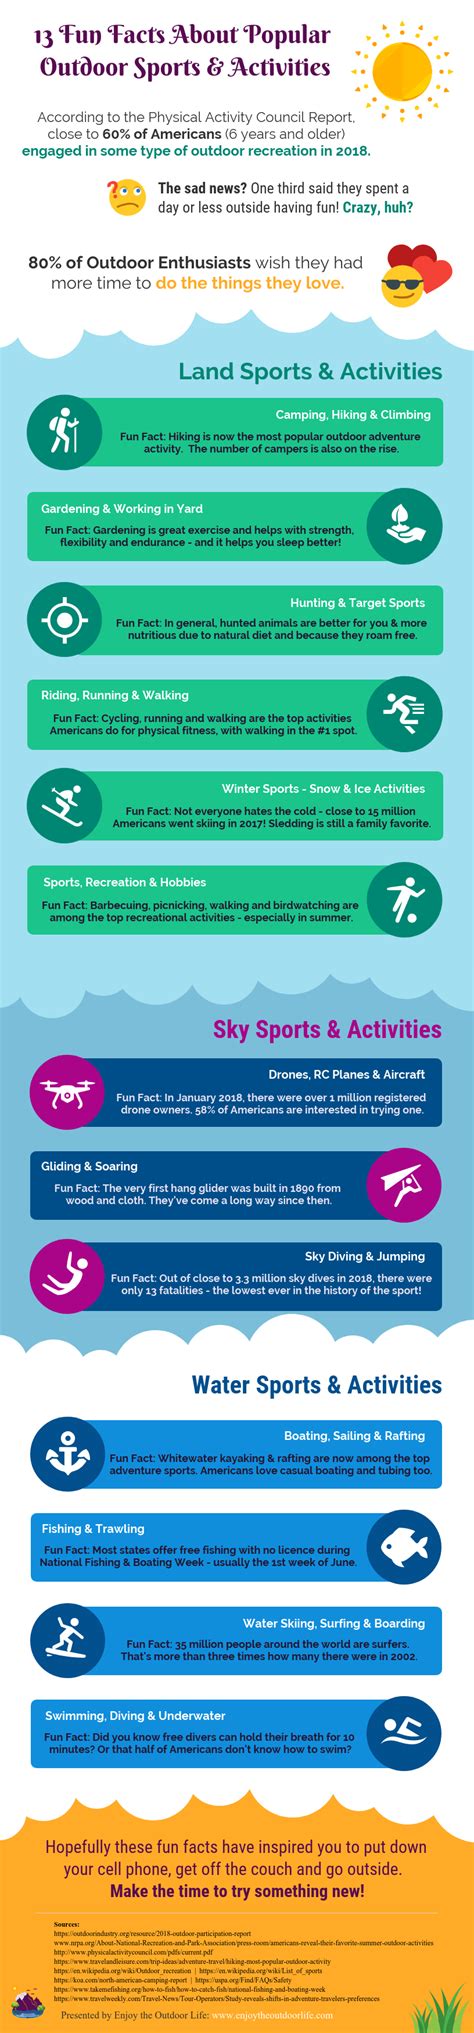 🥇 13 Fun Facts — Popular Outdoor Sports And Activities Infographic